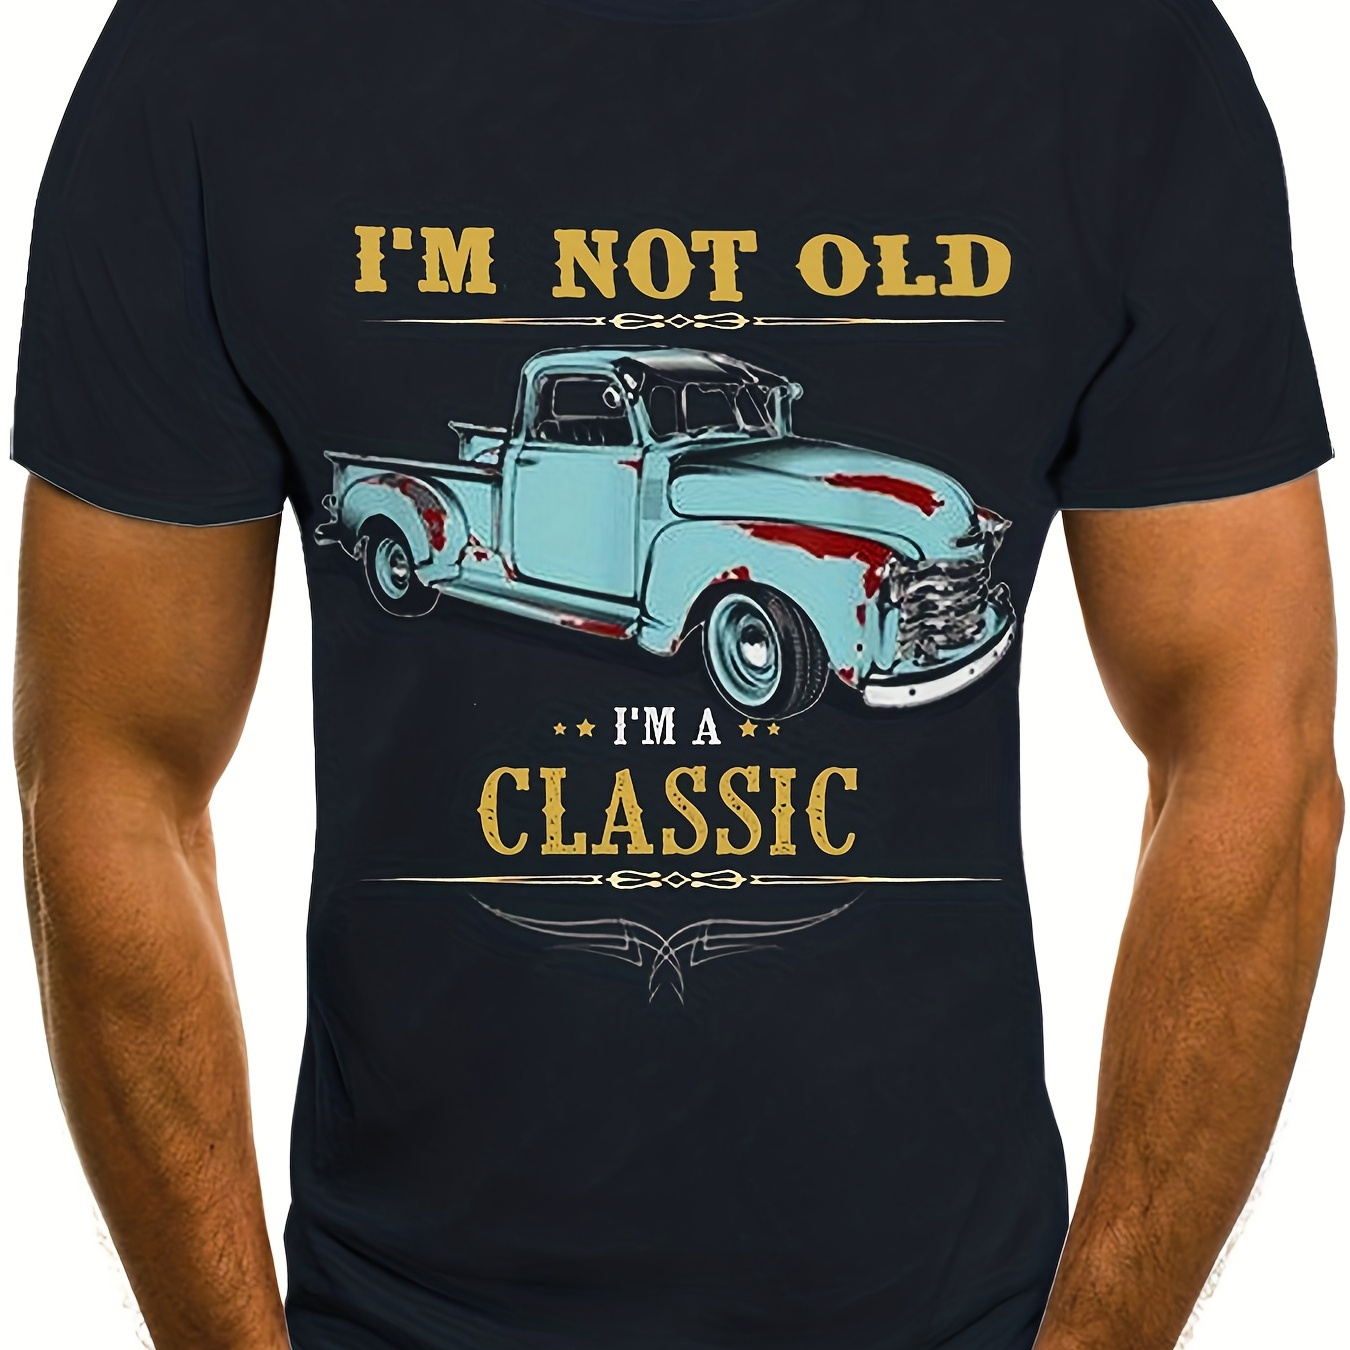 

Men's Retro Style Car Pattern And Alphabet Print "i'm Not Old I'm Classic" T-shirt With Crew Neck And Short Sleeve, Stylish And Chic Tops For Summer Leisurewear